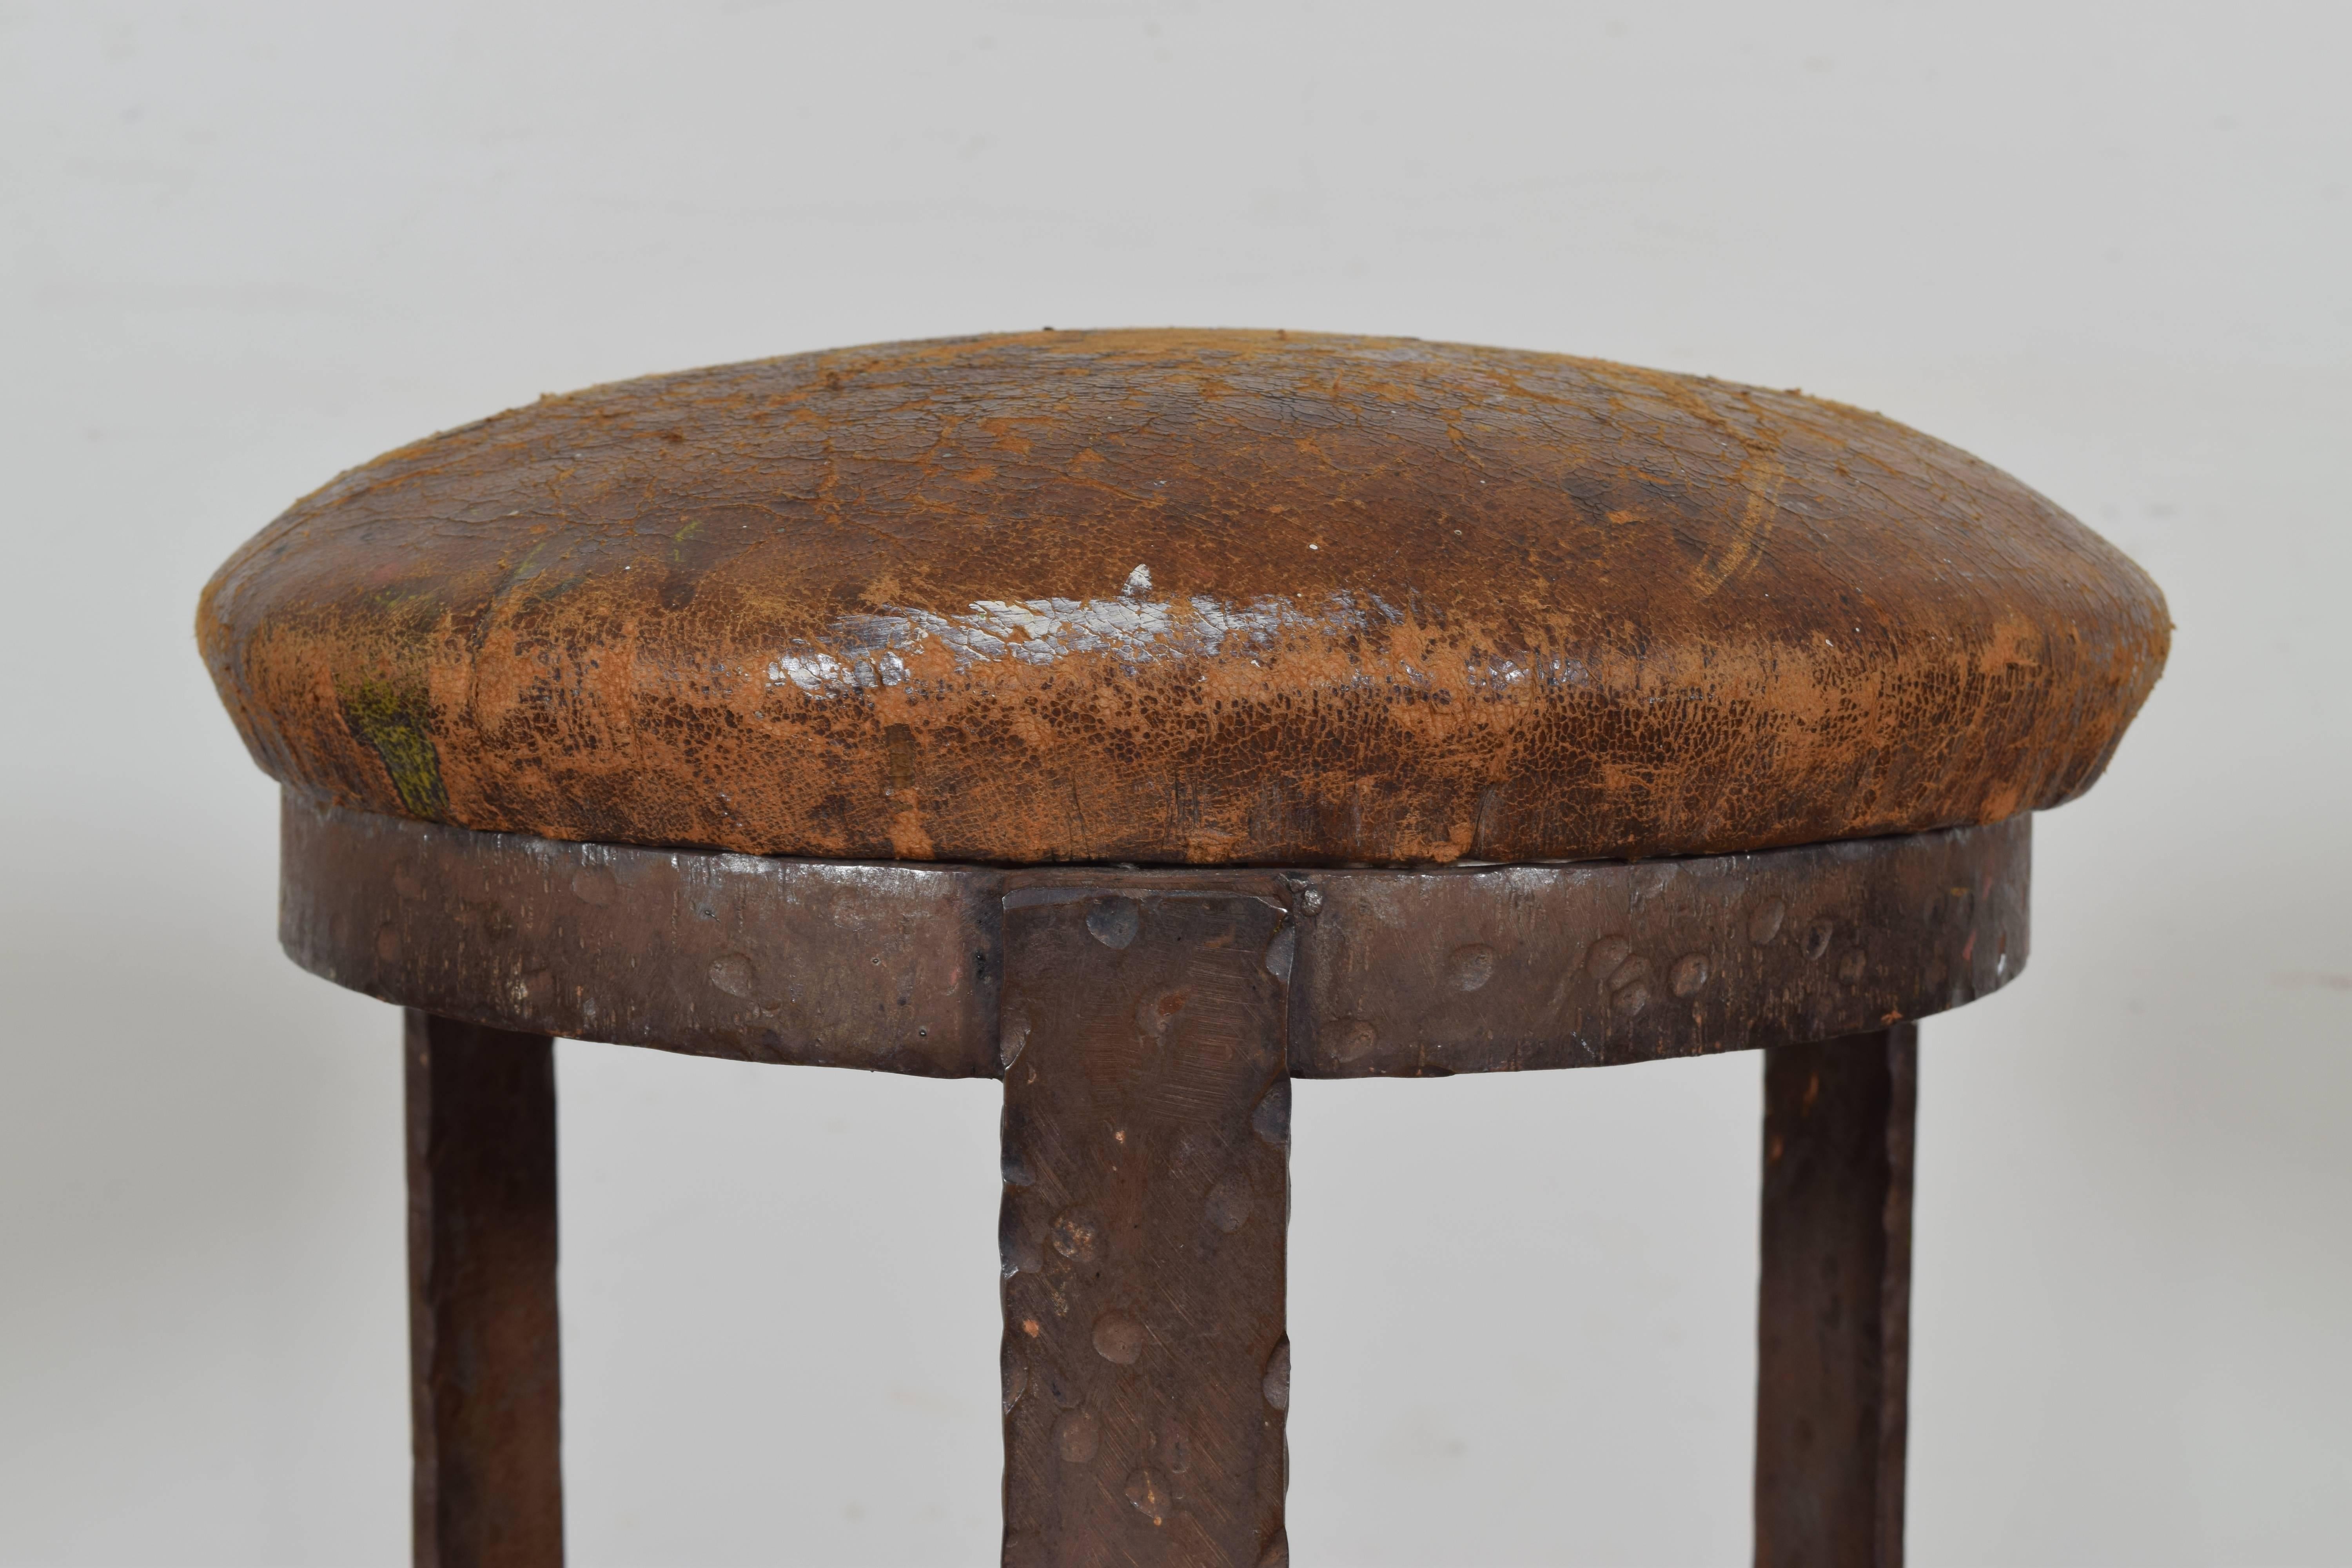 Three legs with round stretchers, with a drop in leather upholstered seat.